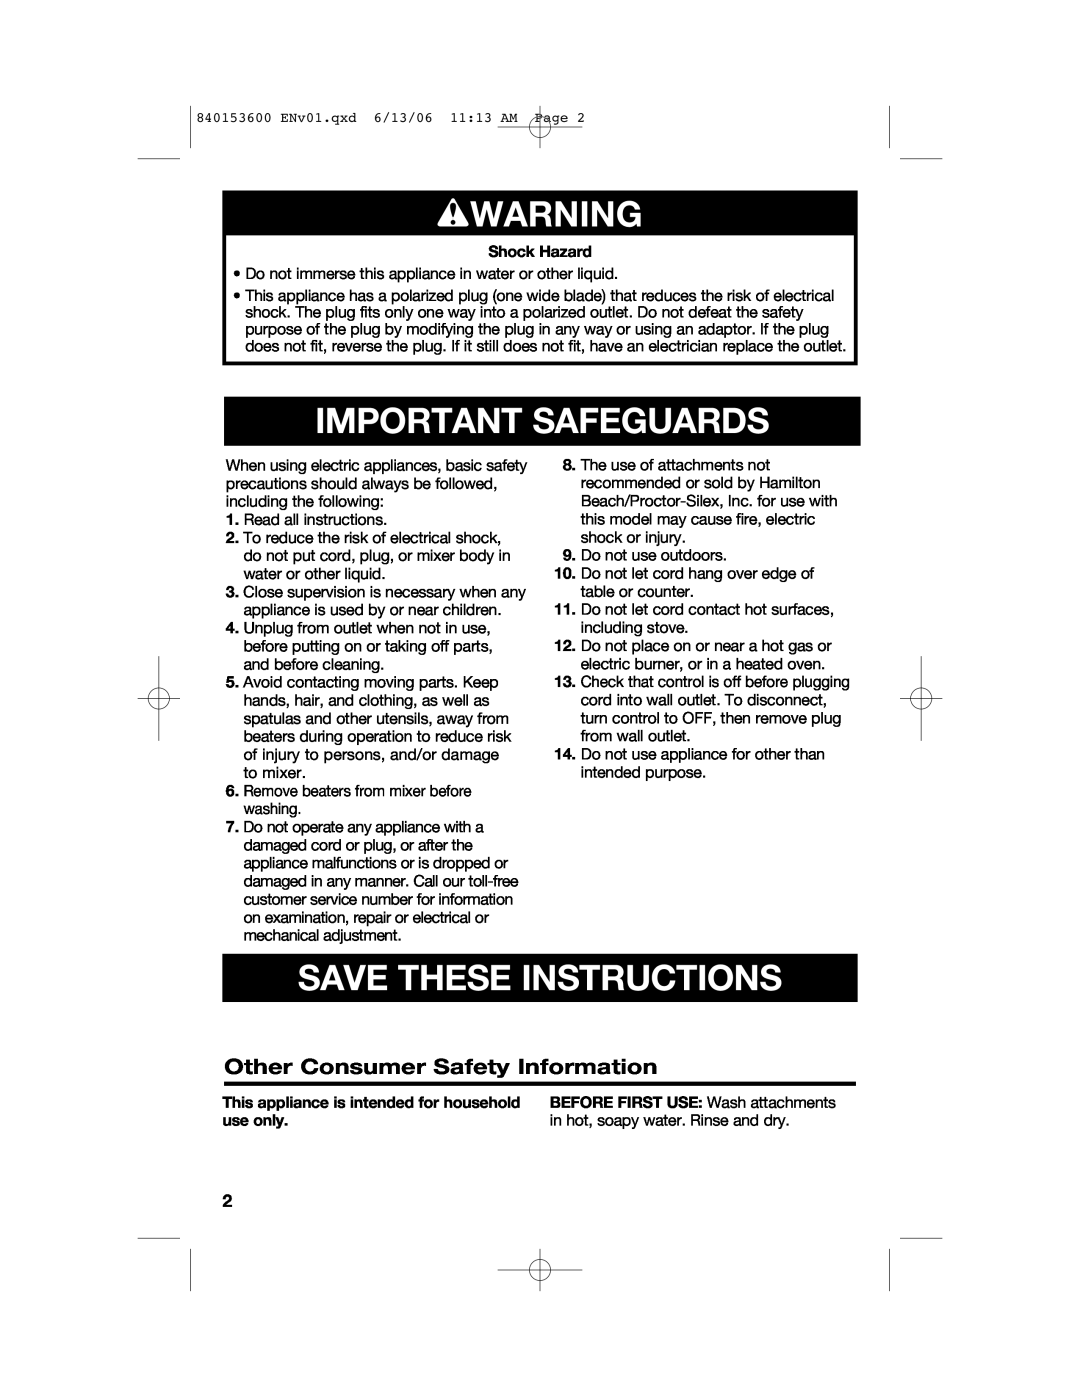 Hamilton Beach 62660 manual wWARNING, Important Safeguards, Save These Instructions, Other Consumer Safety Information 